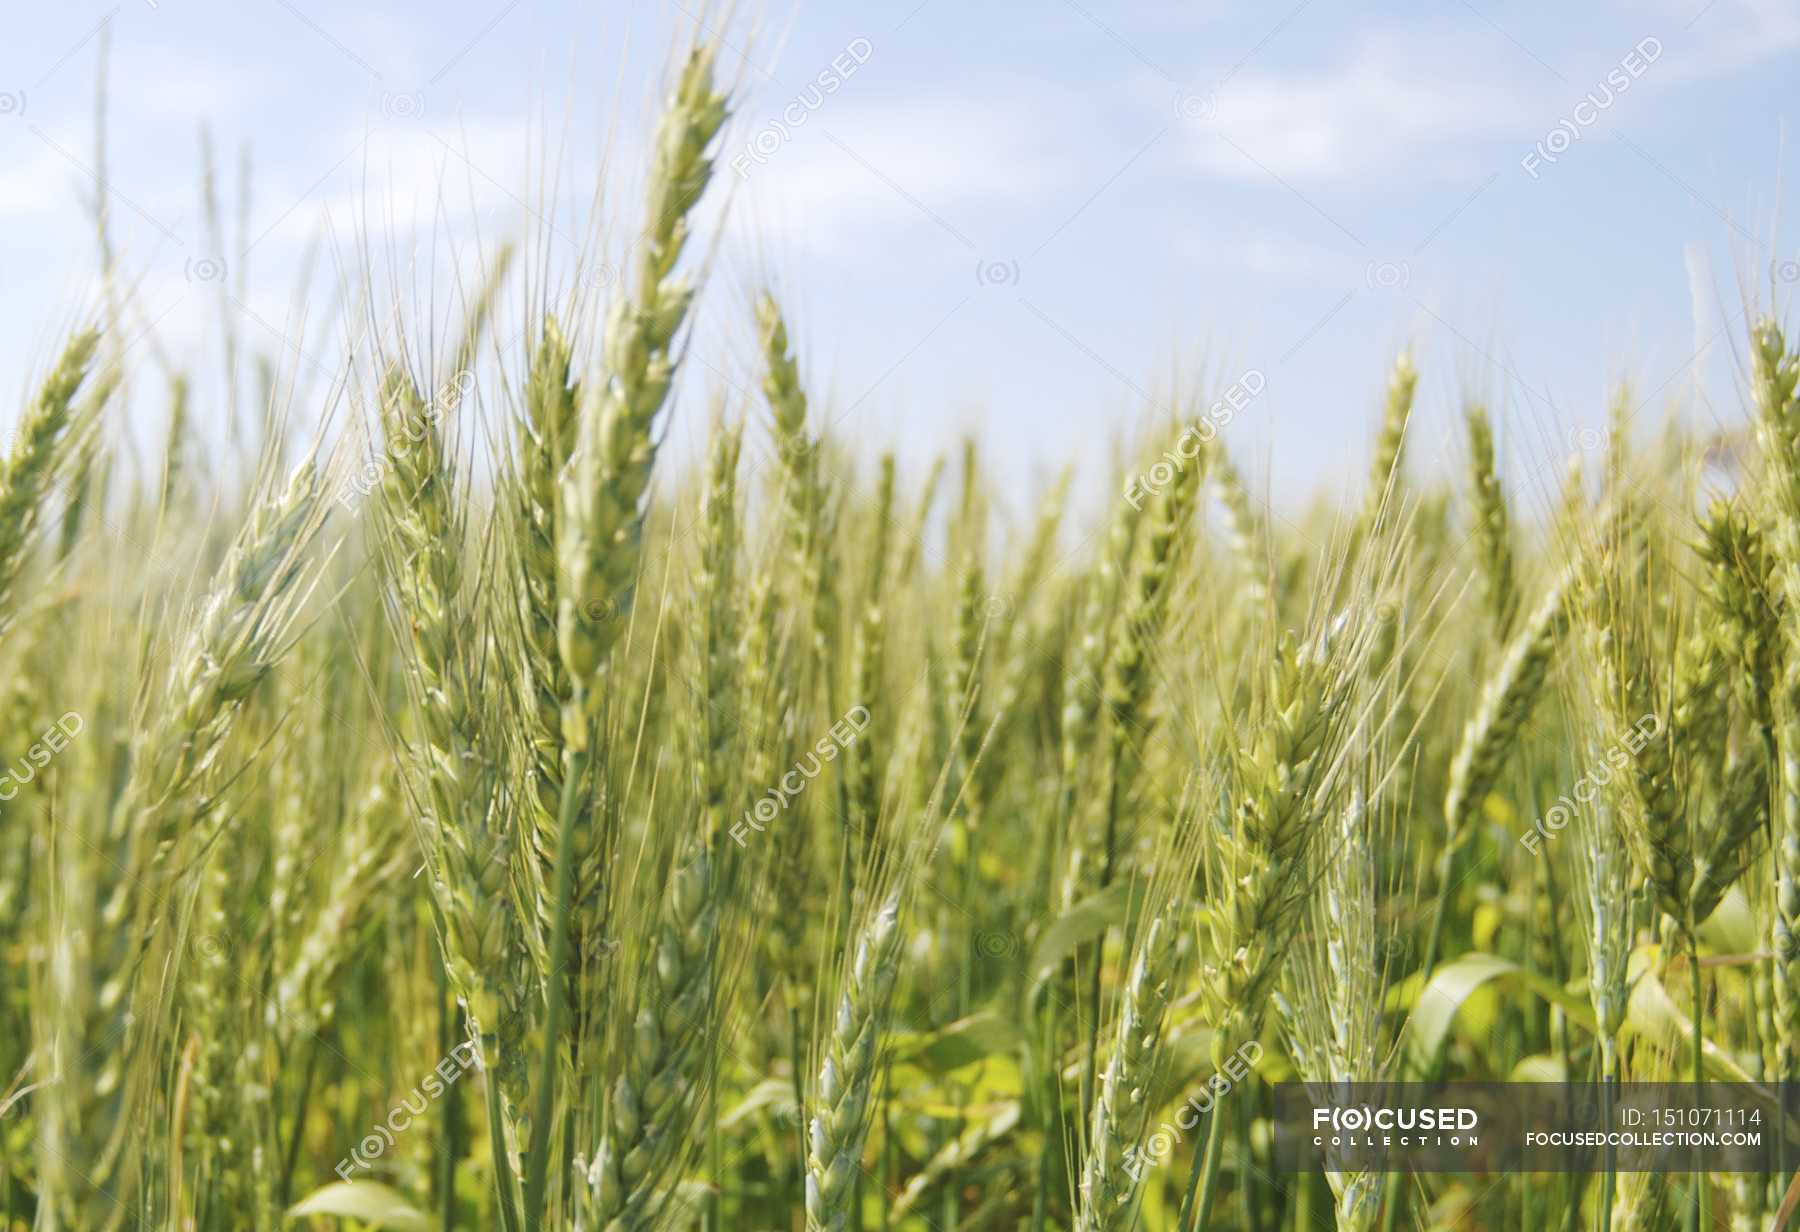 Daytime view of wheat ears in the field — Stock Photo | #151071114